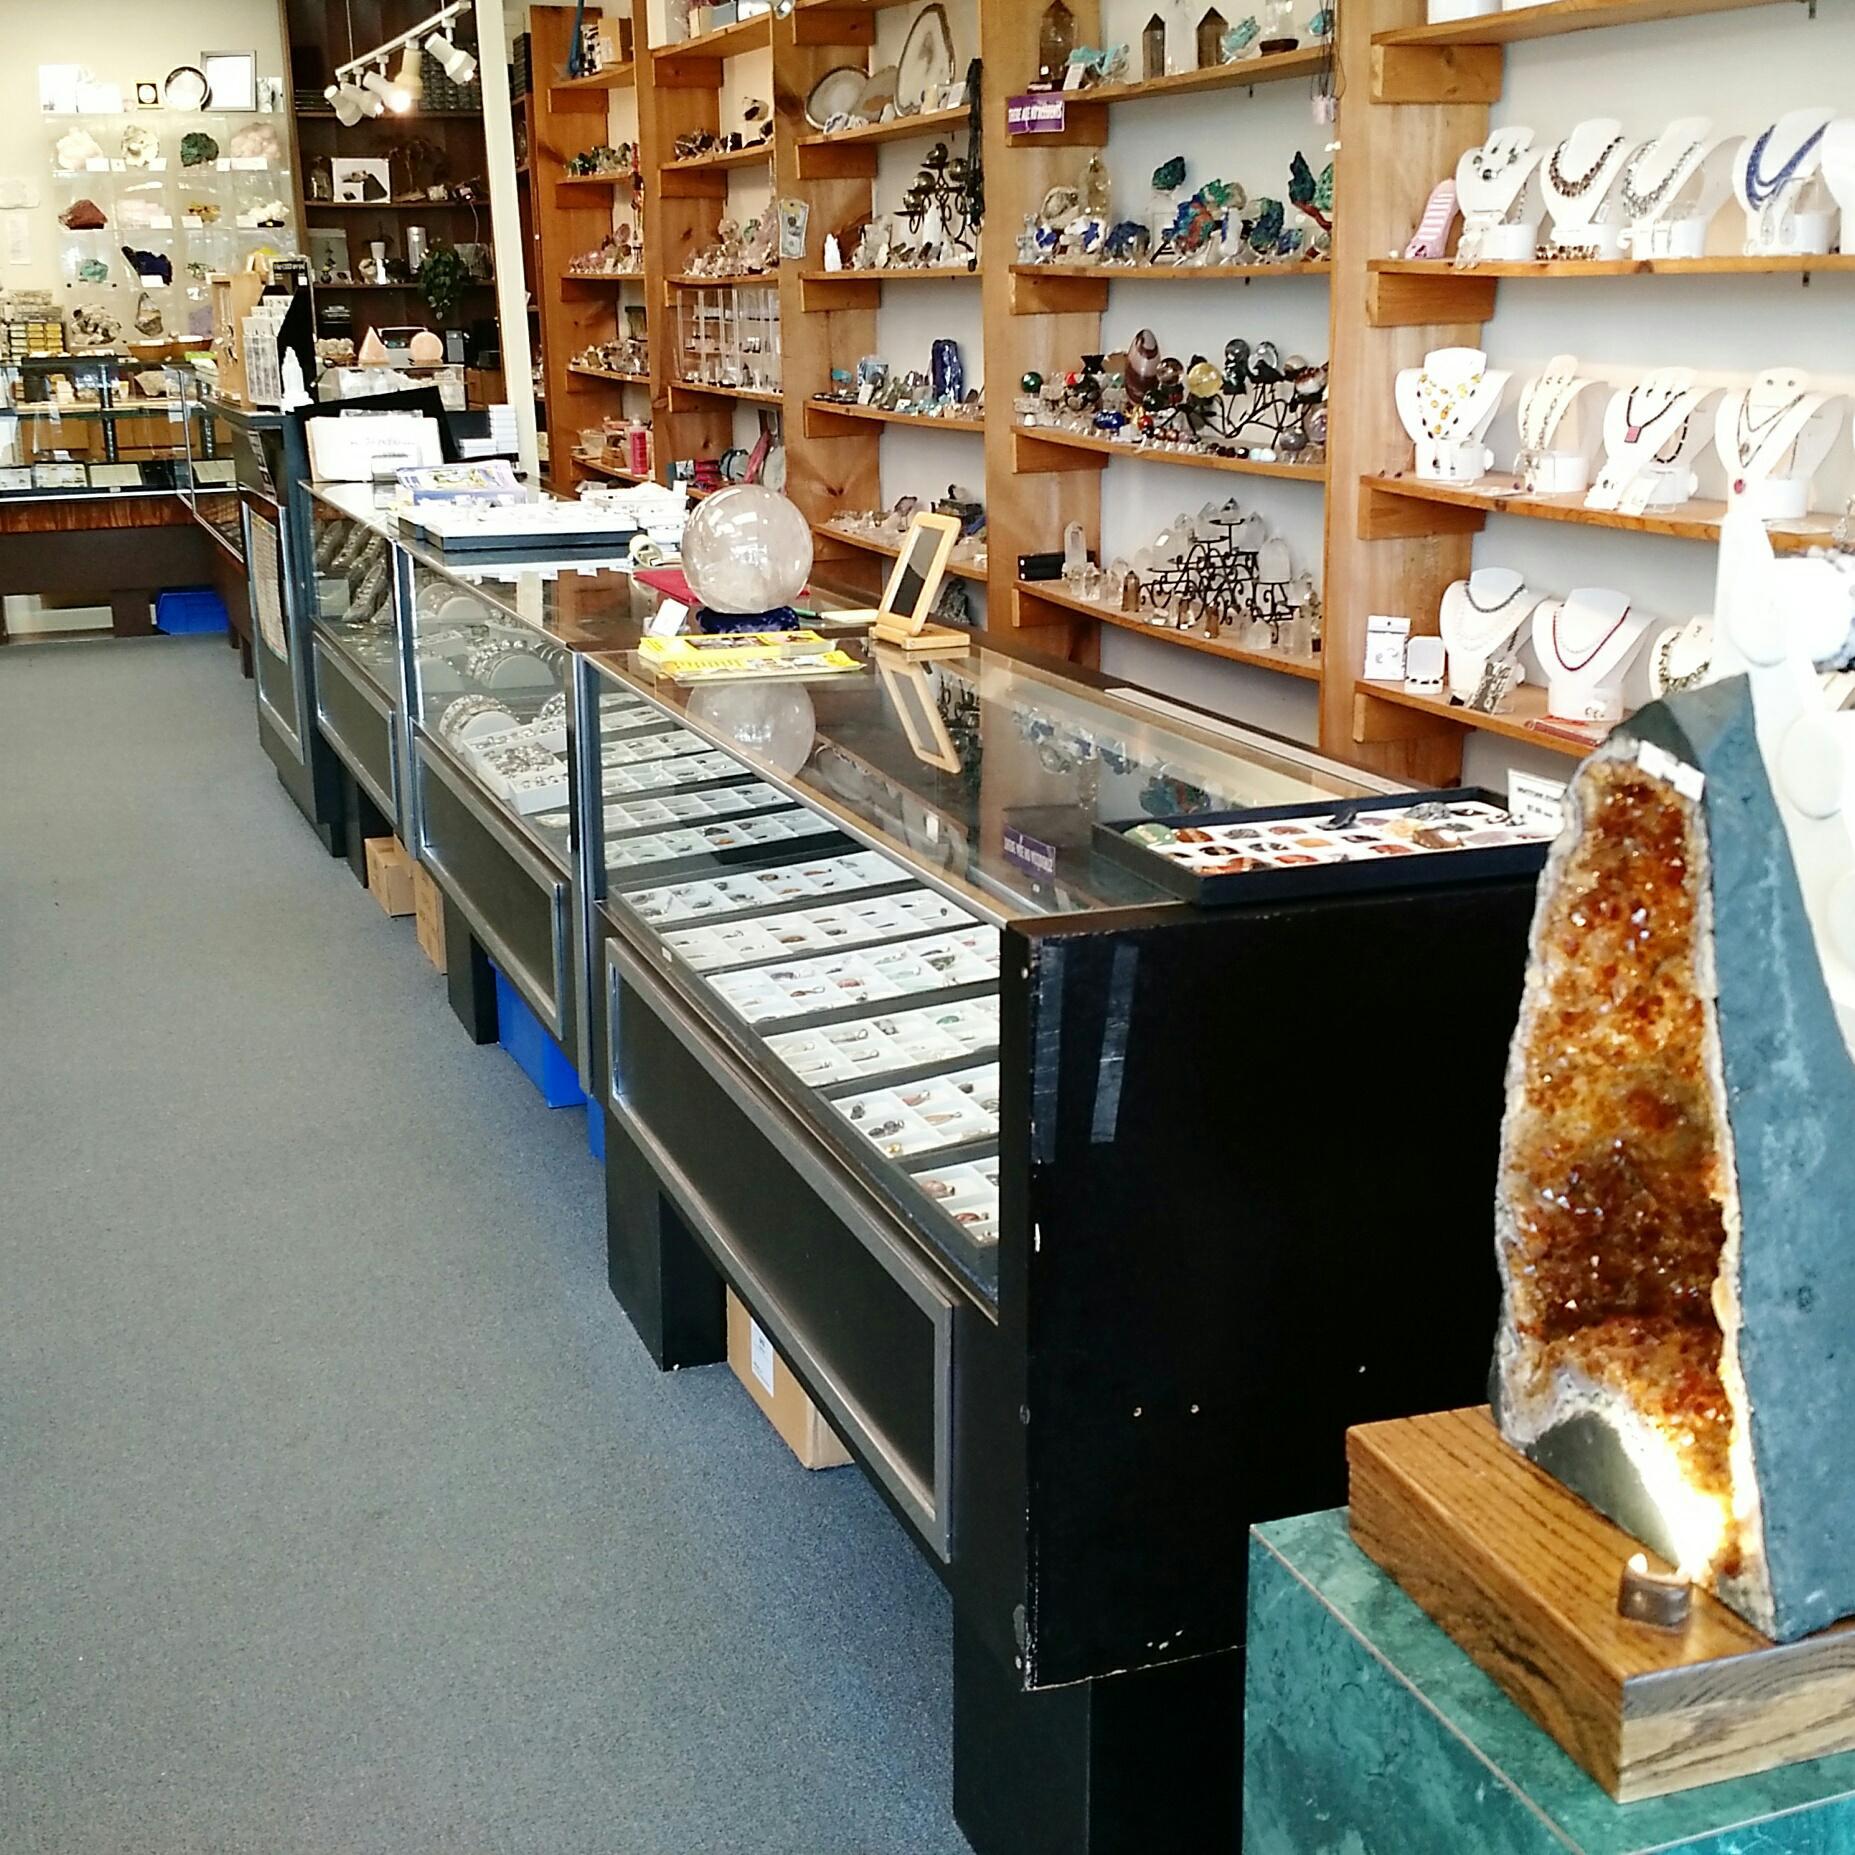 Crystal Cave Rock & Gem Shop Coupons near me in Davie, FL 33314 | 8coupons